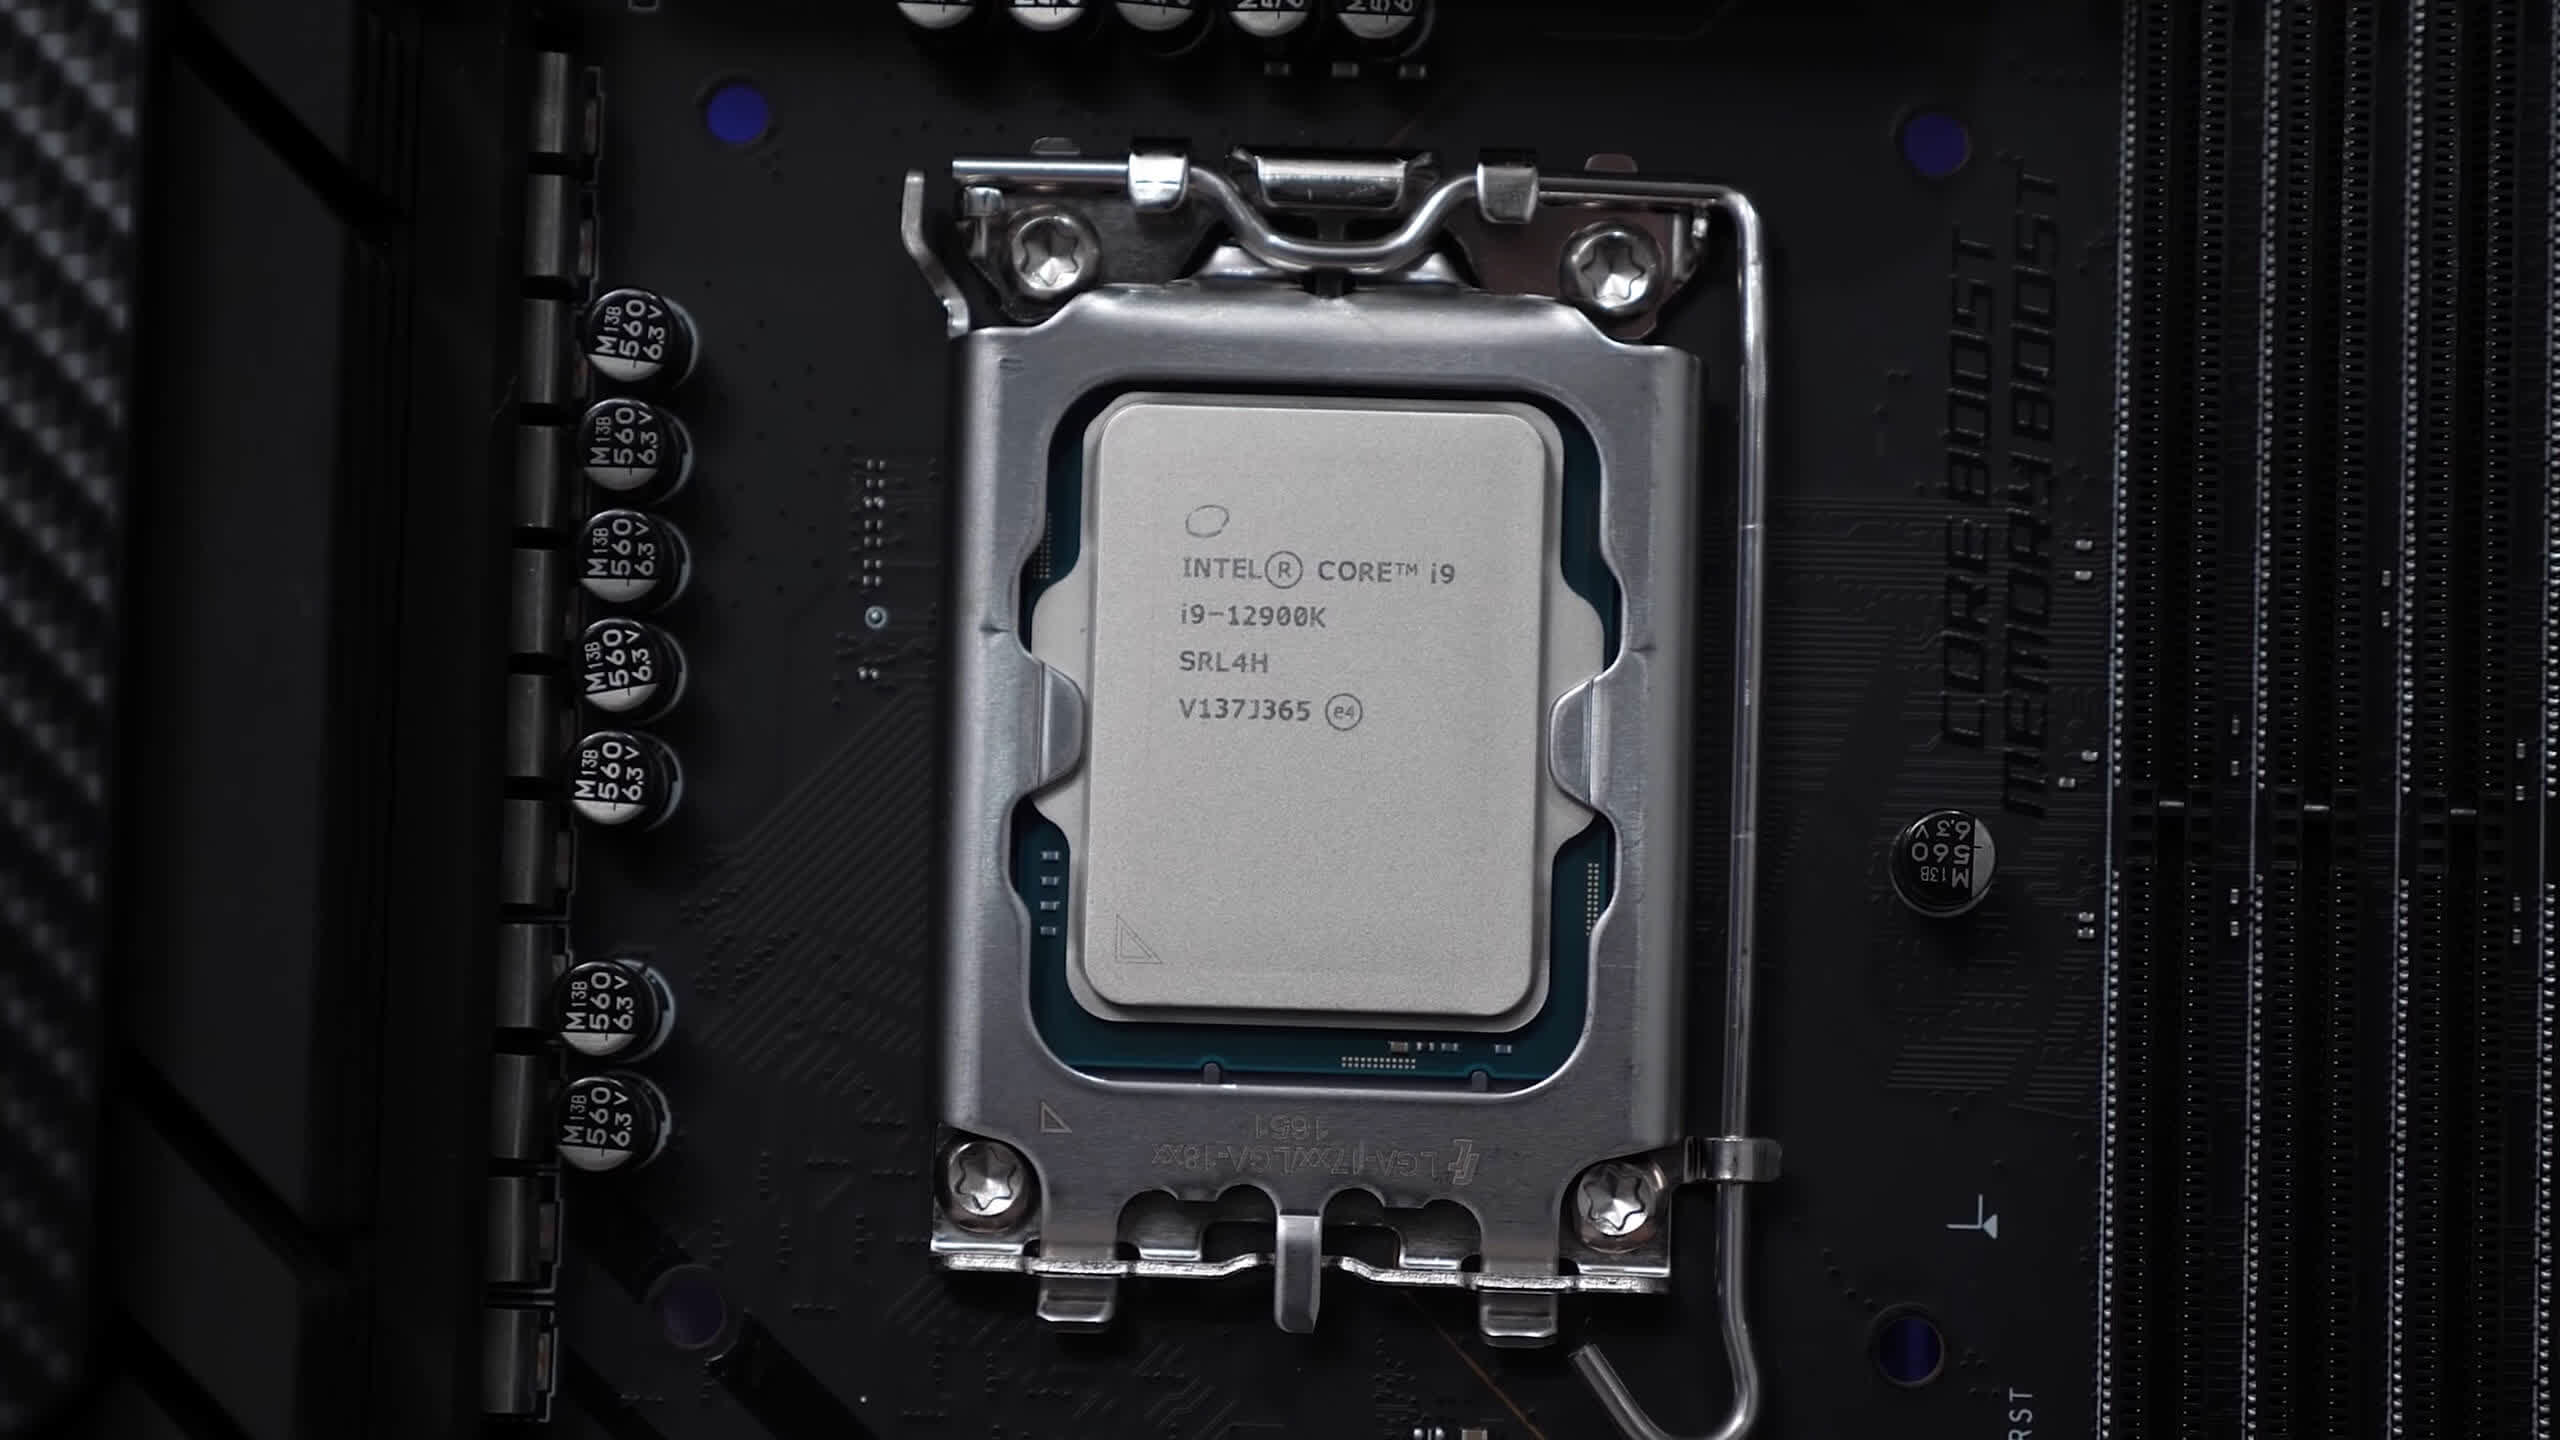 Intel teases new GPU features and a release date for the i9-12900KS